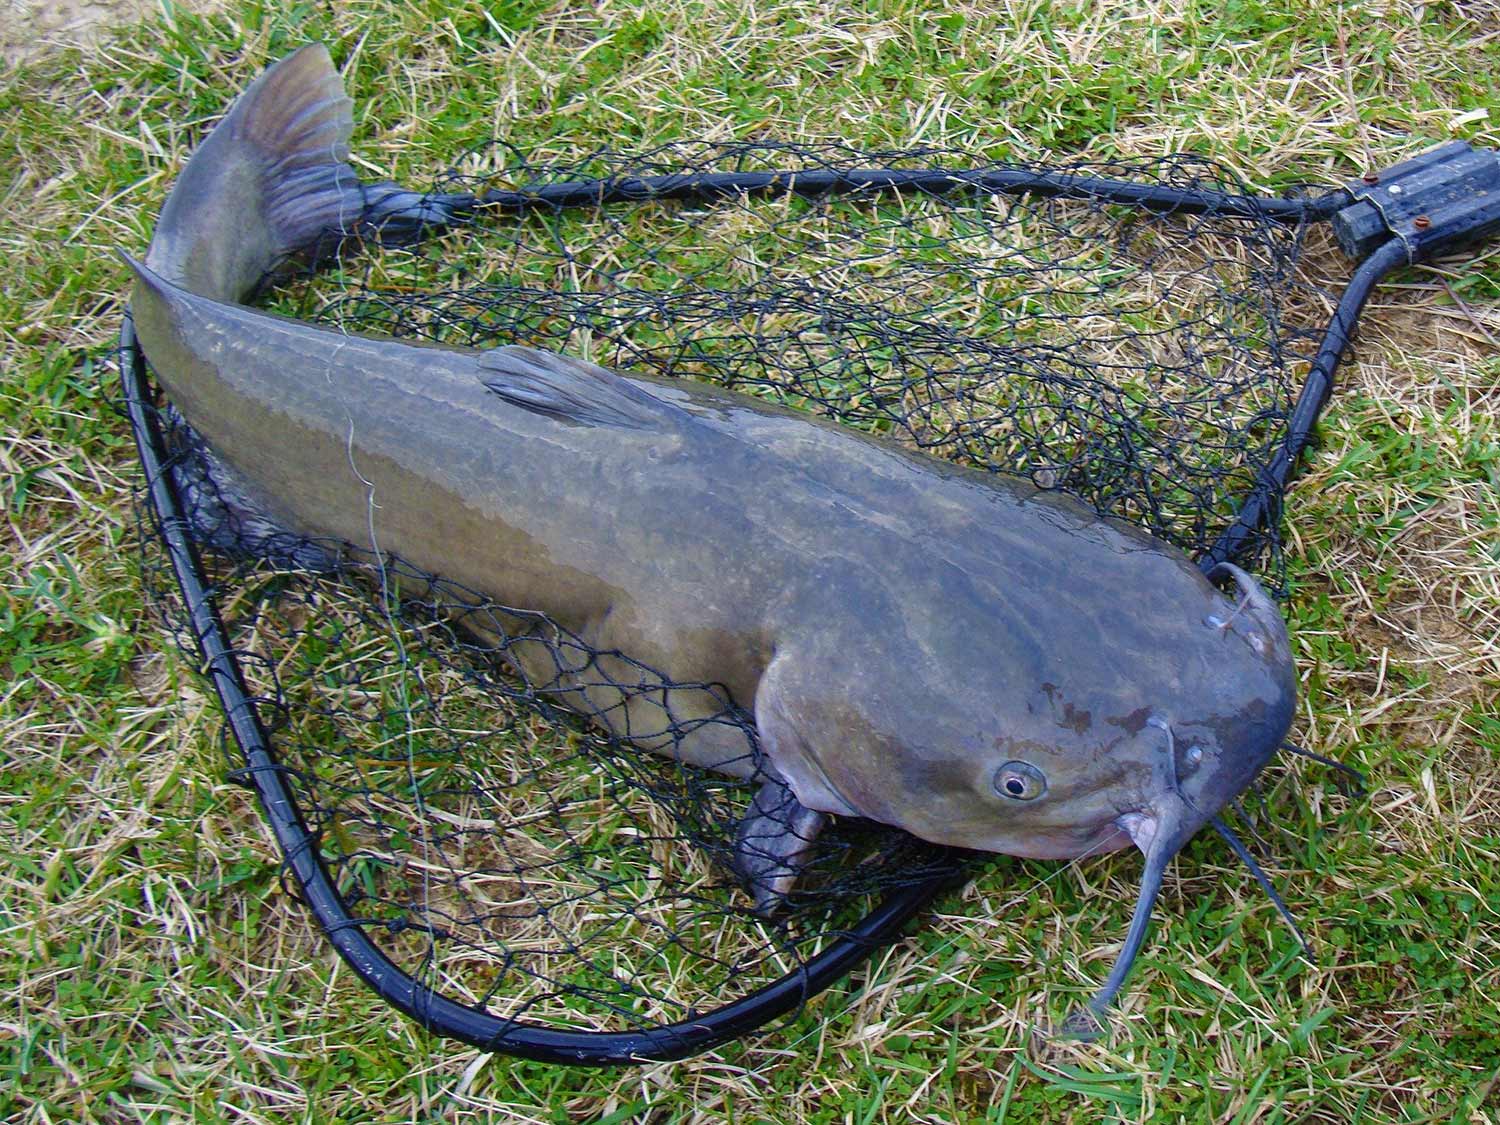 Some catfish can grow extremely big.